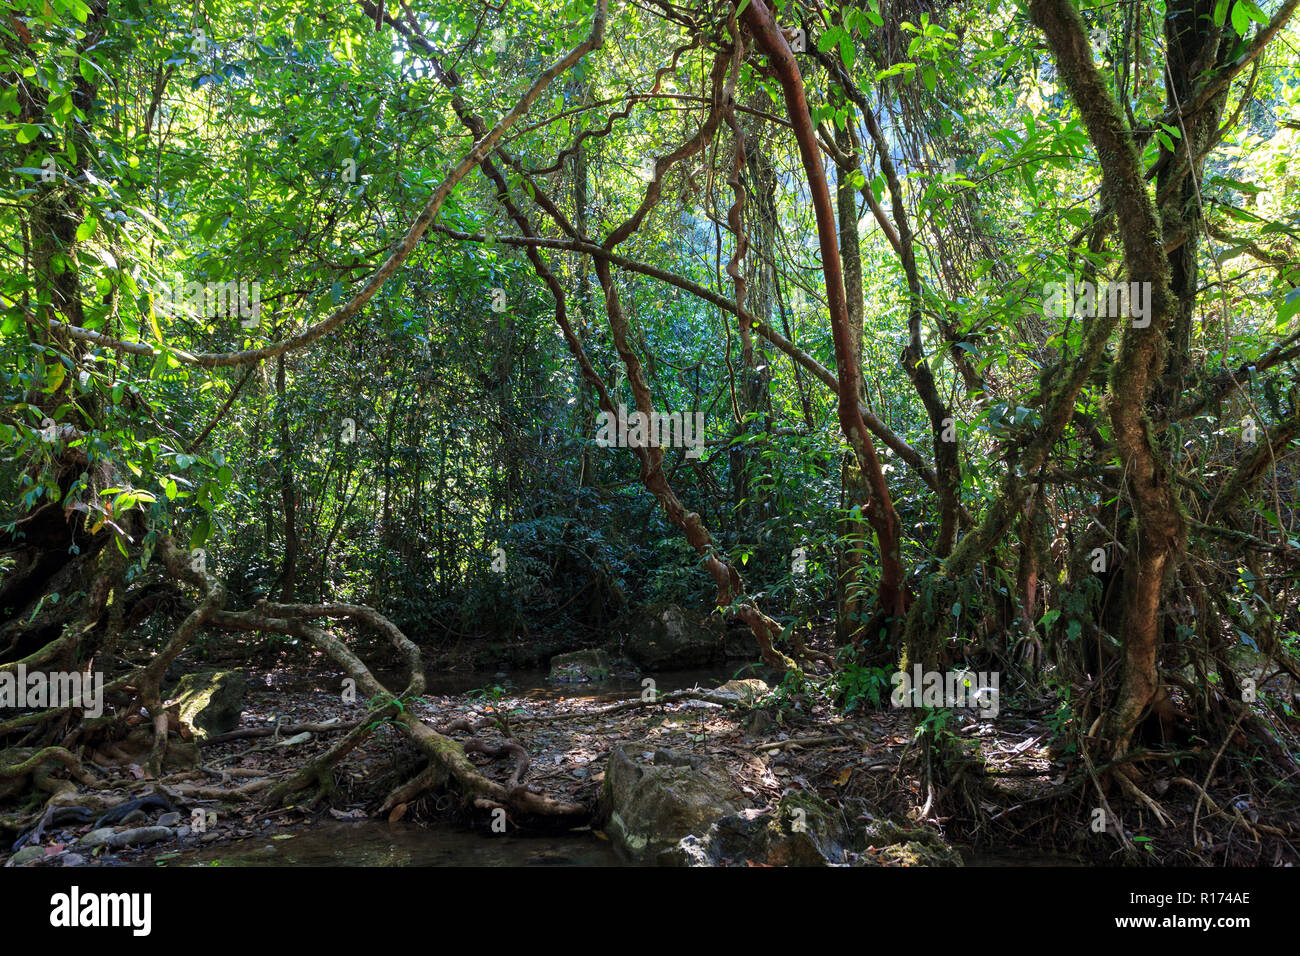 Dense jungle with twisted and entangled vines int he Khao Sok national park, Thailand Stock Photo